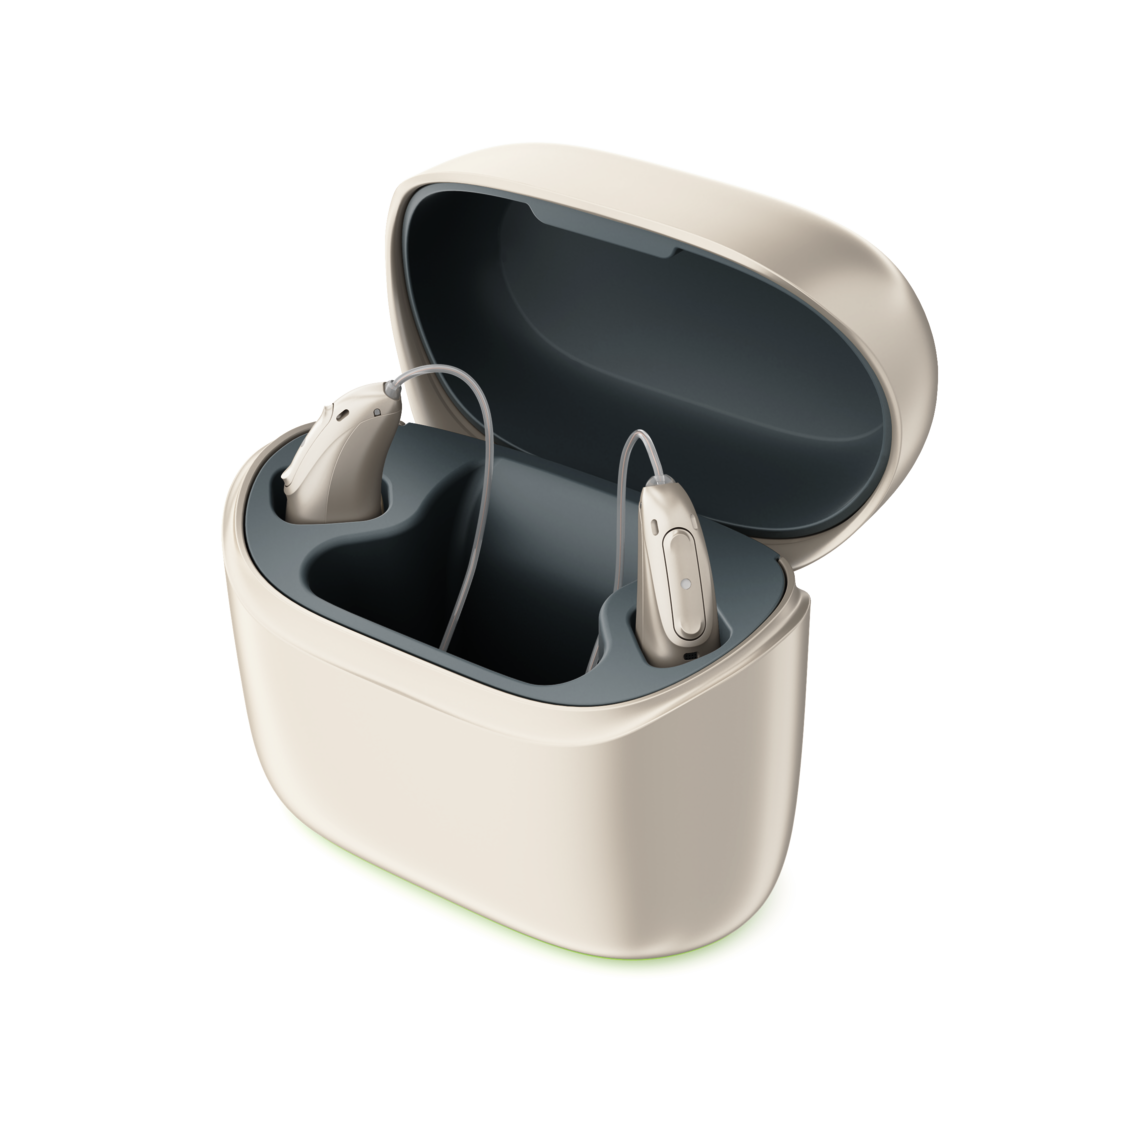 Phonak Charger Ease